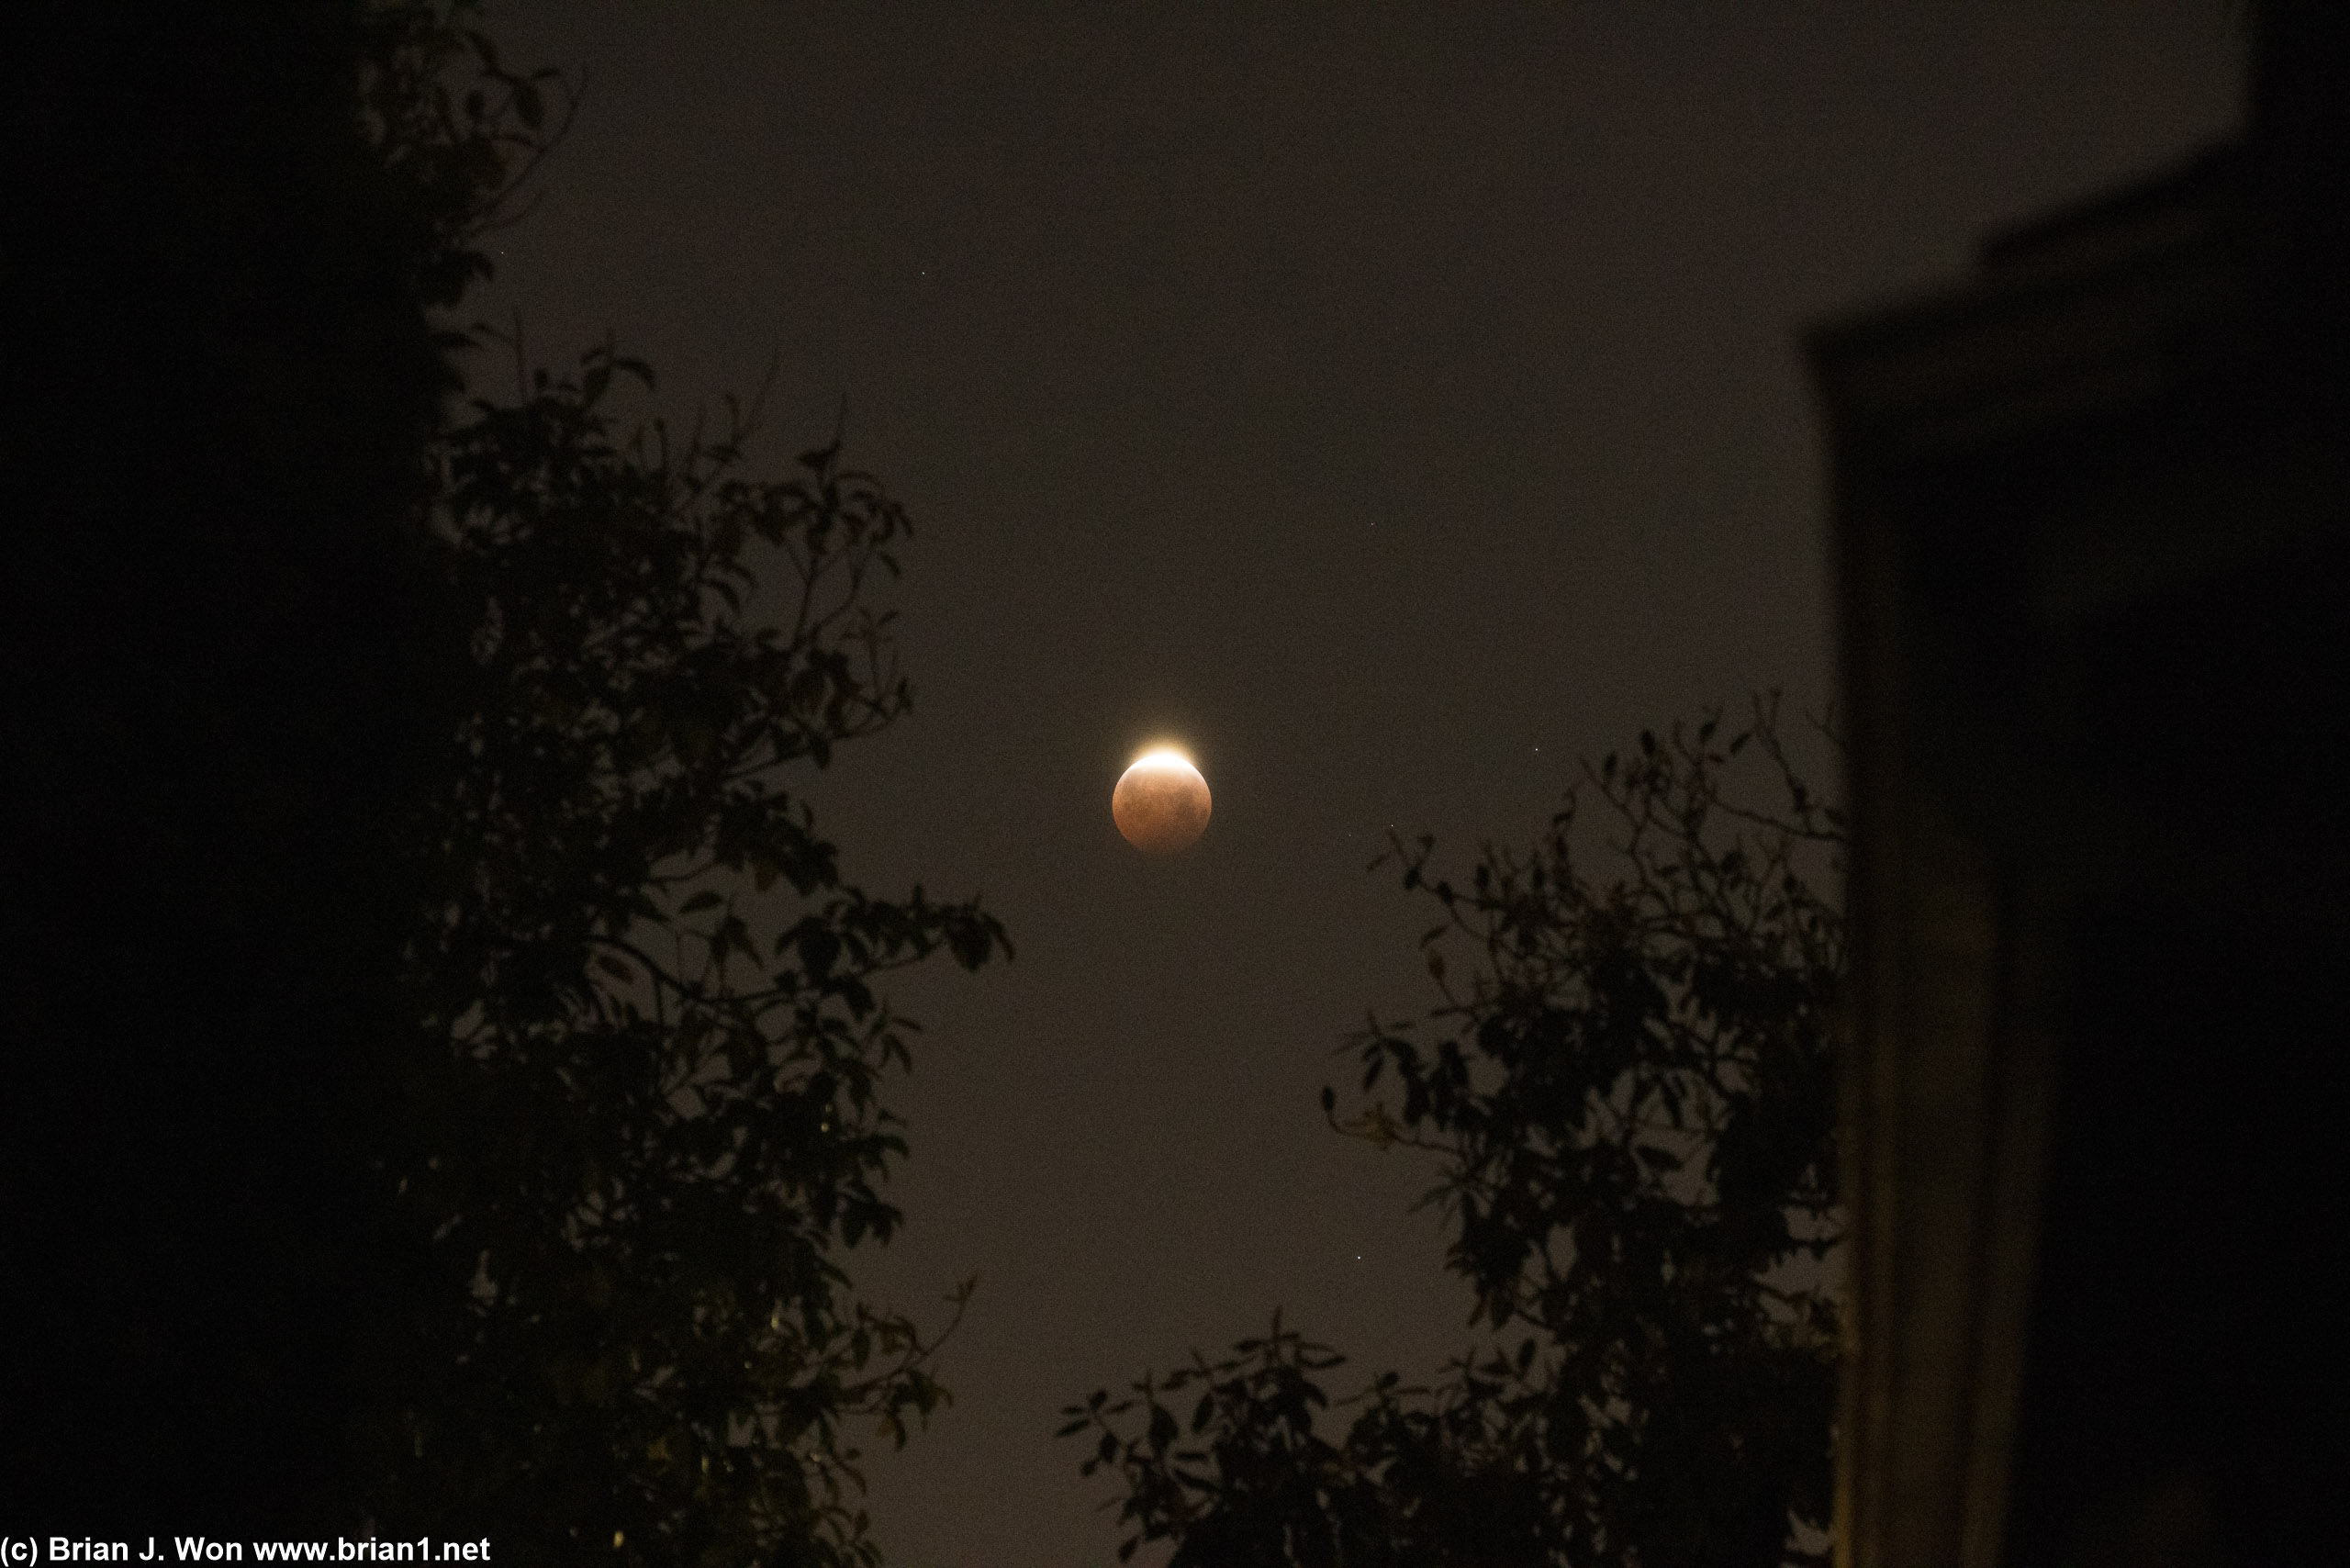 Now deep into the partial lunar eclipse phase.